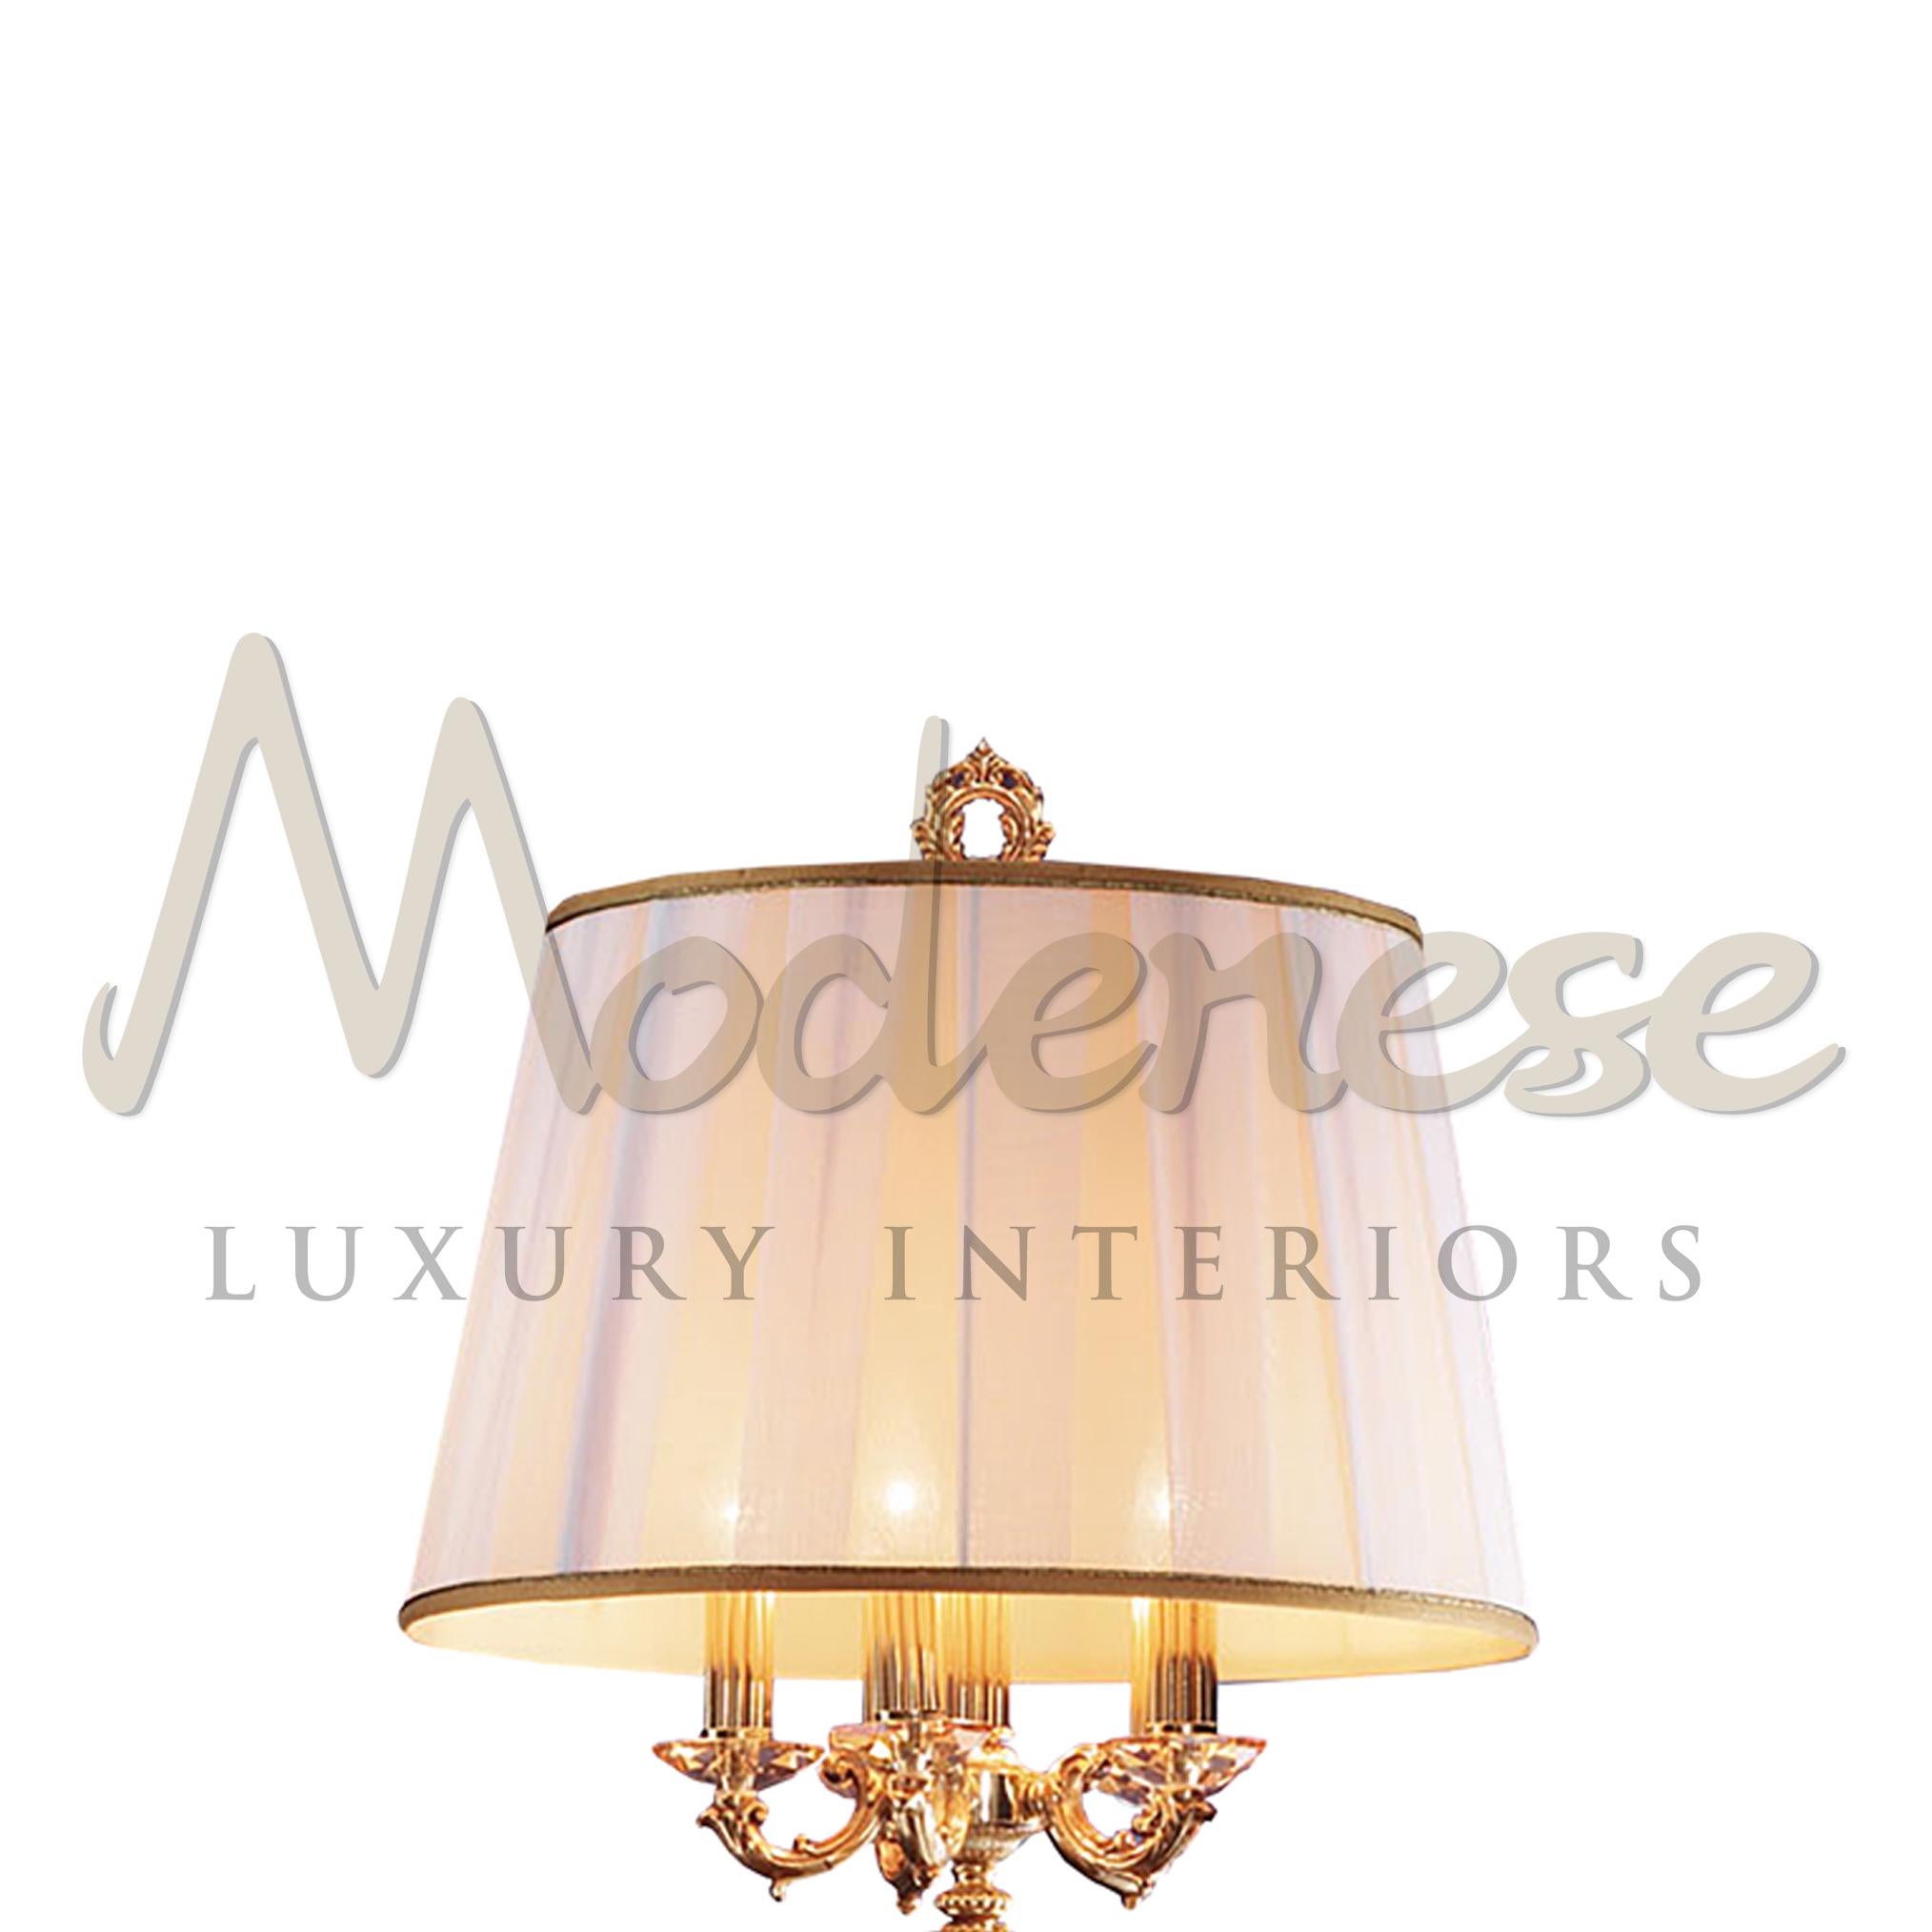 Baroque 4 Lights Floor Lamp in Amber Glass in French Gold Finish by Modenese Interiors For Sale